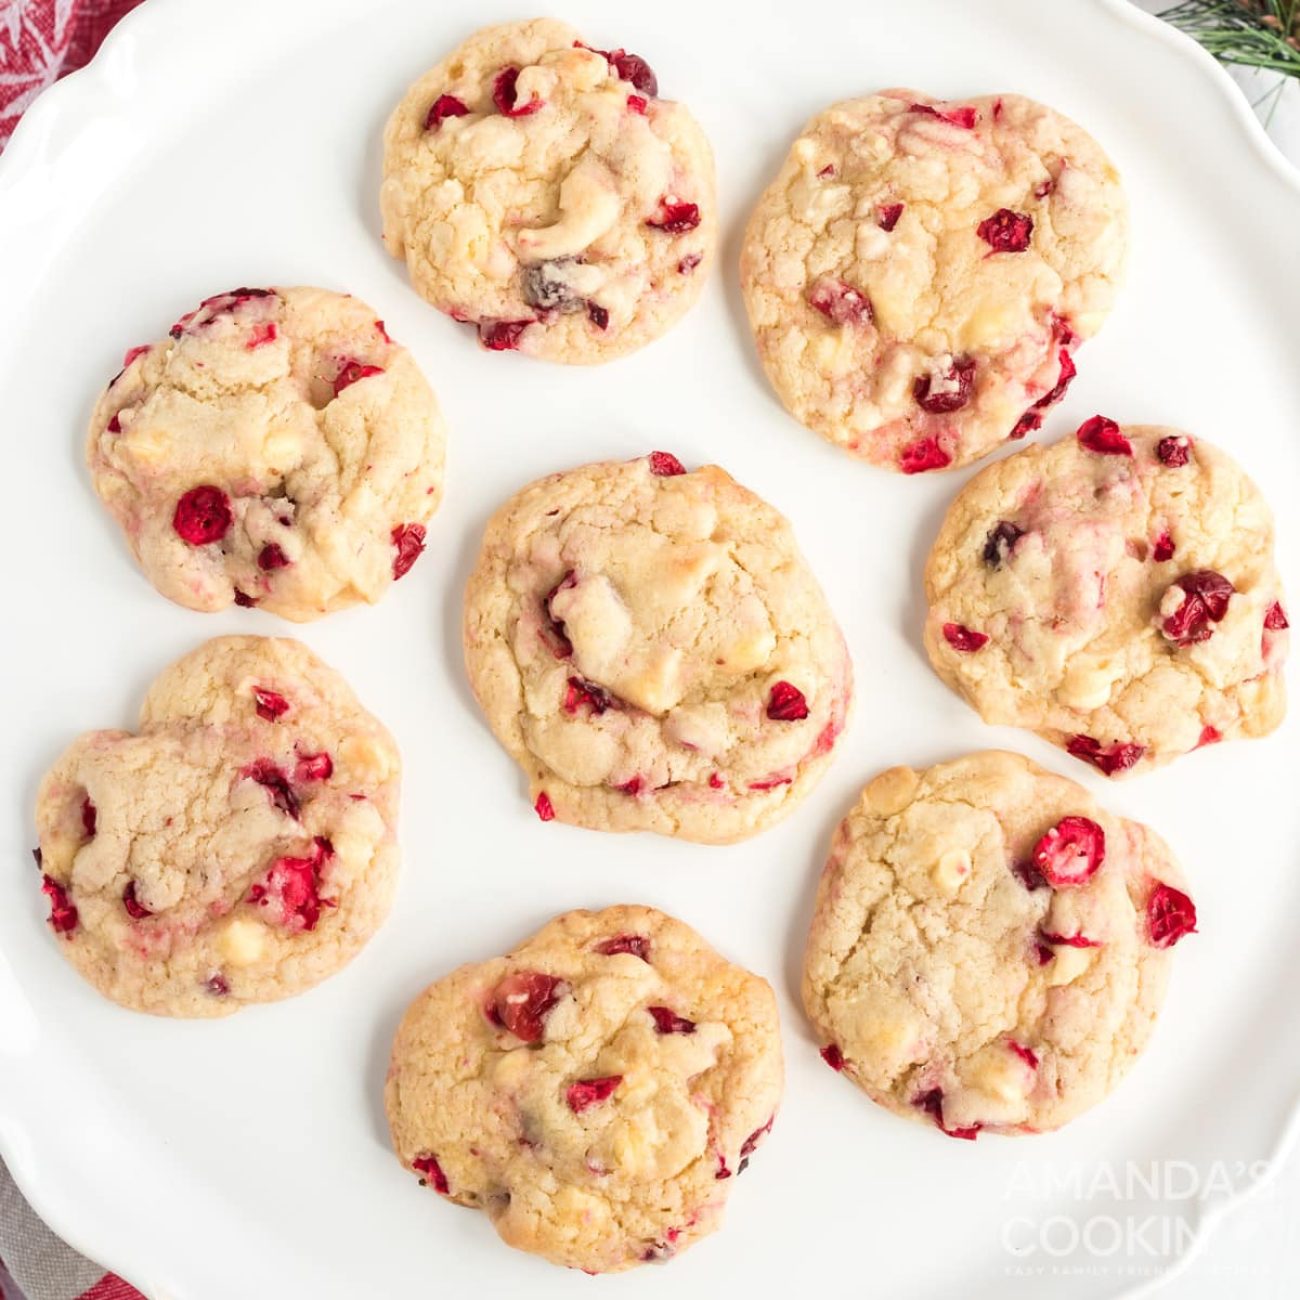 Chocolate Cranberry Cookies Mix In A